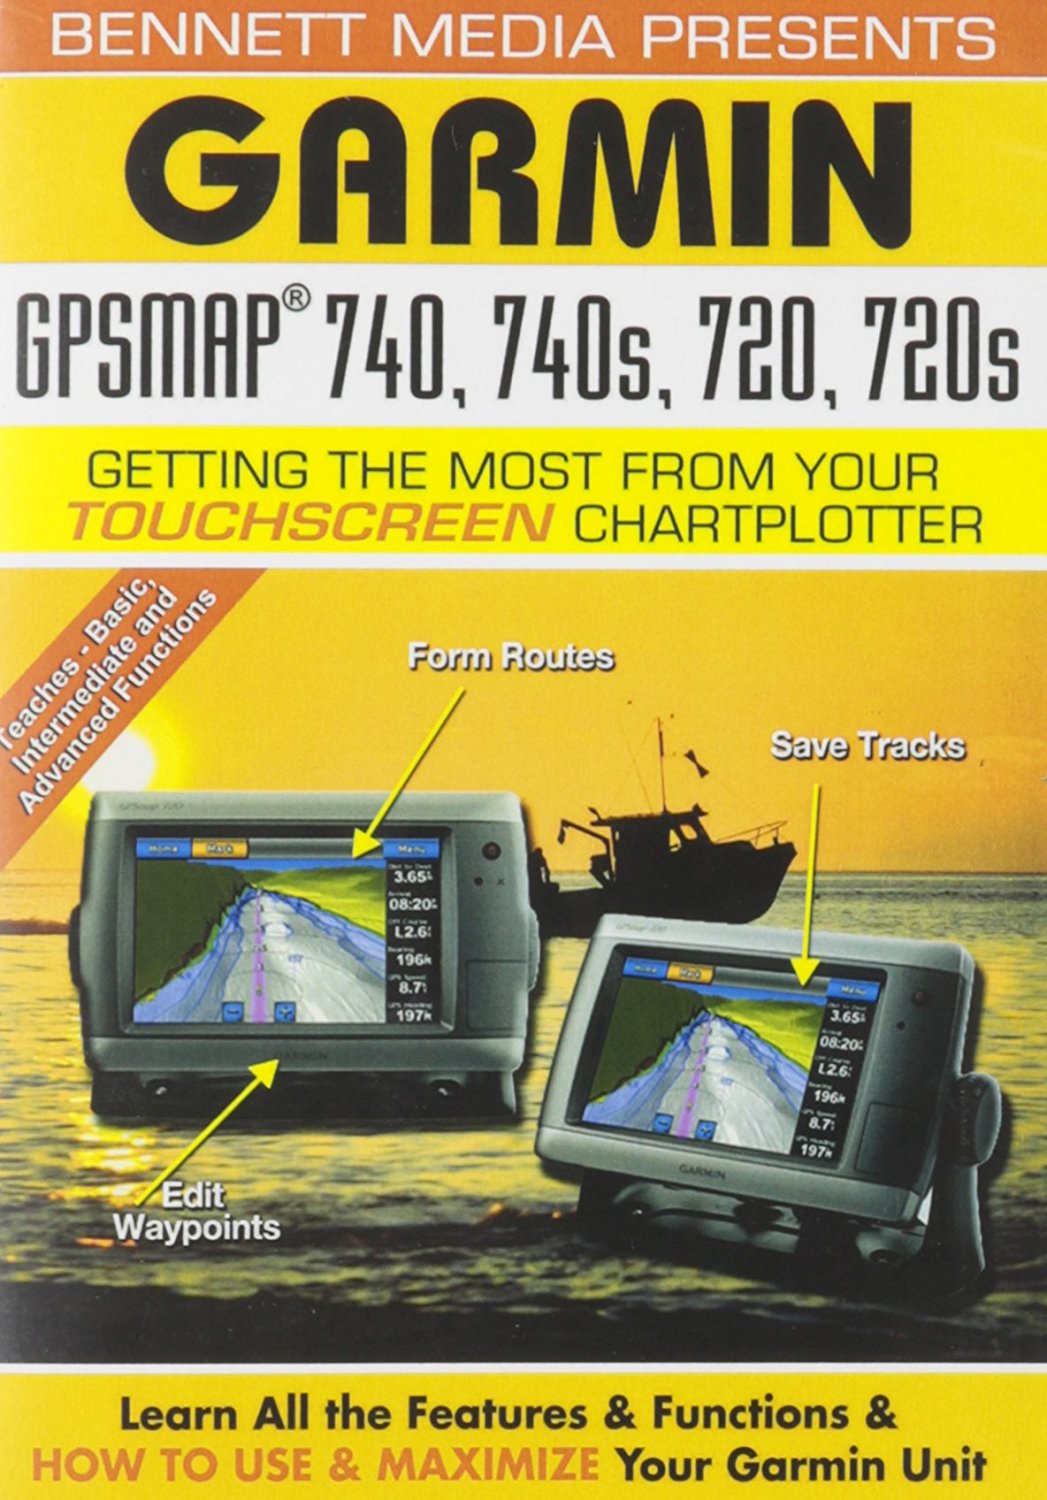 Best Buy: Garmin GPS Map: 740, 740S, 720, Getting the Most from Your Touchscreen Chartplotter